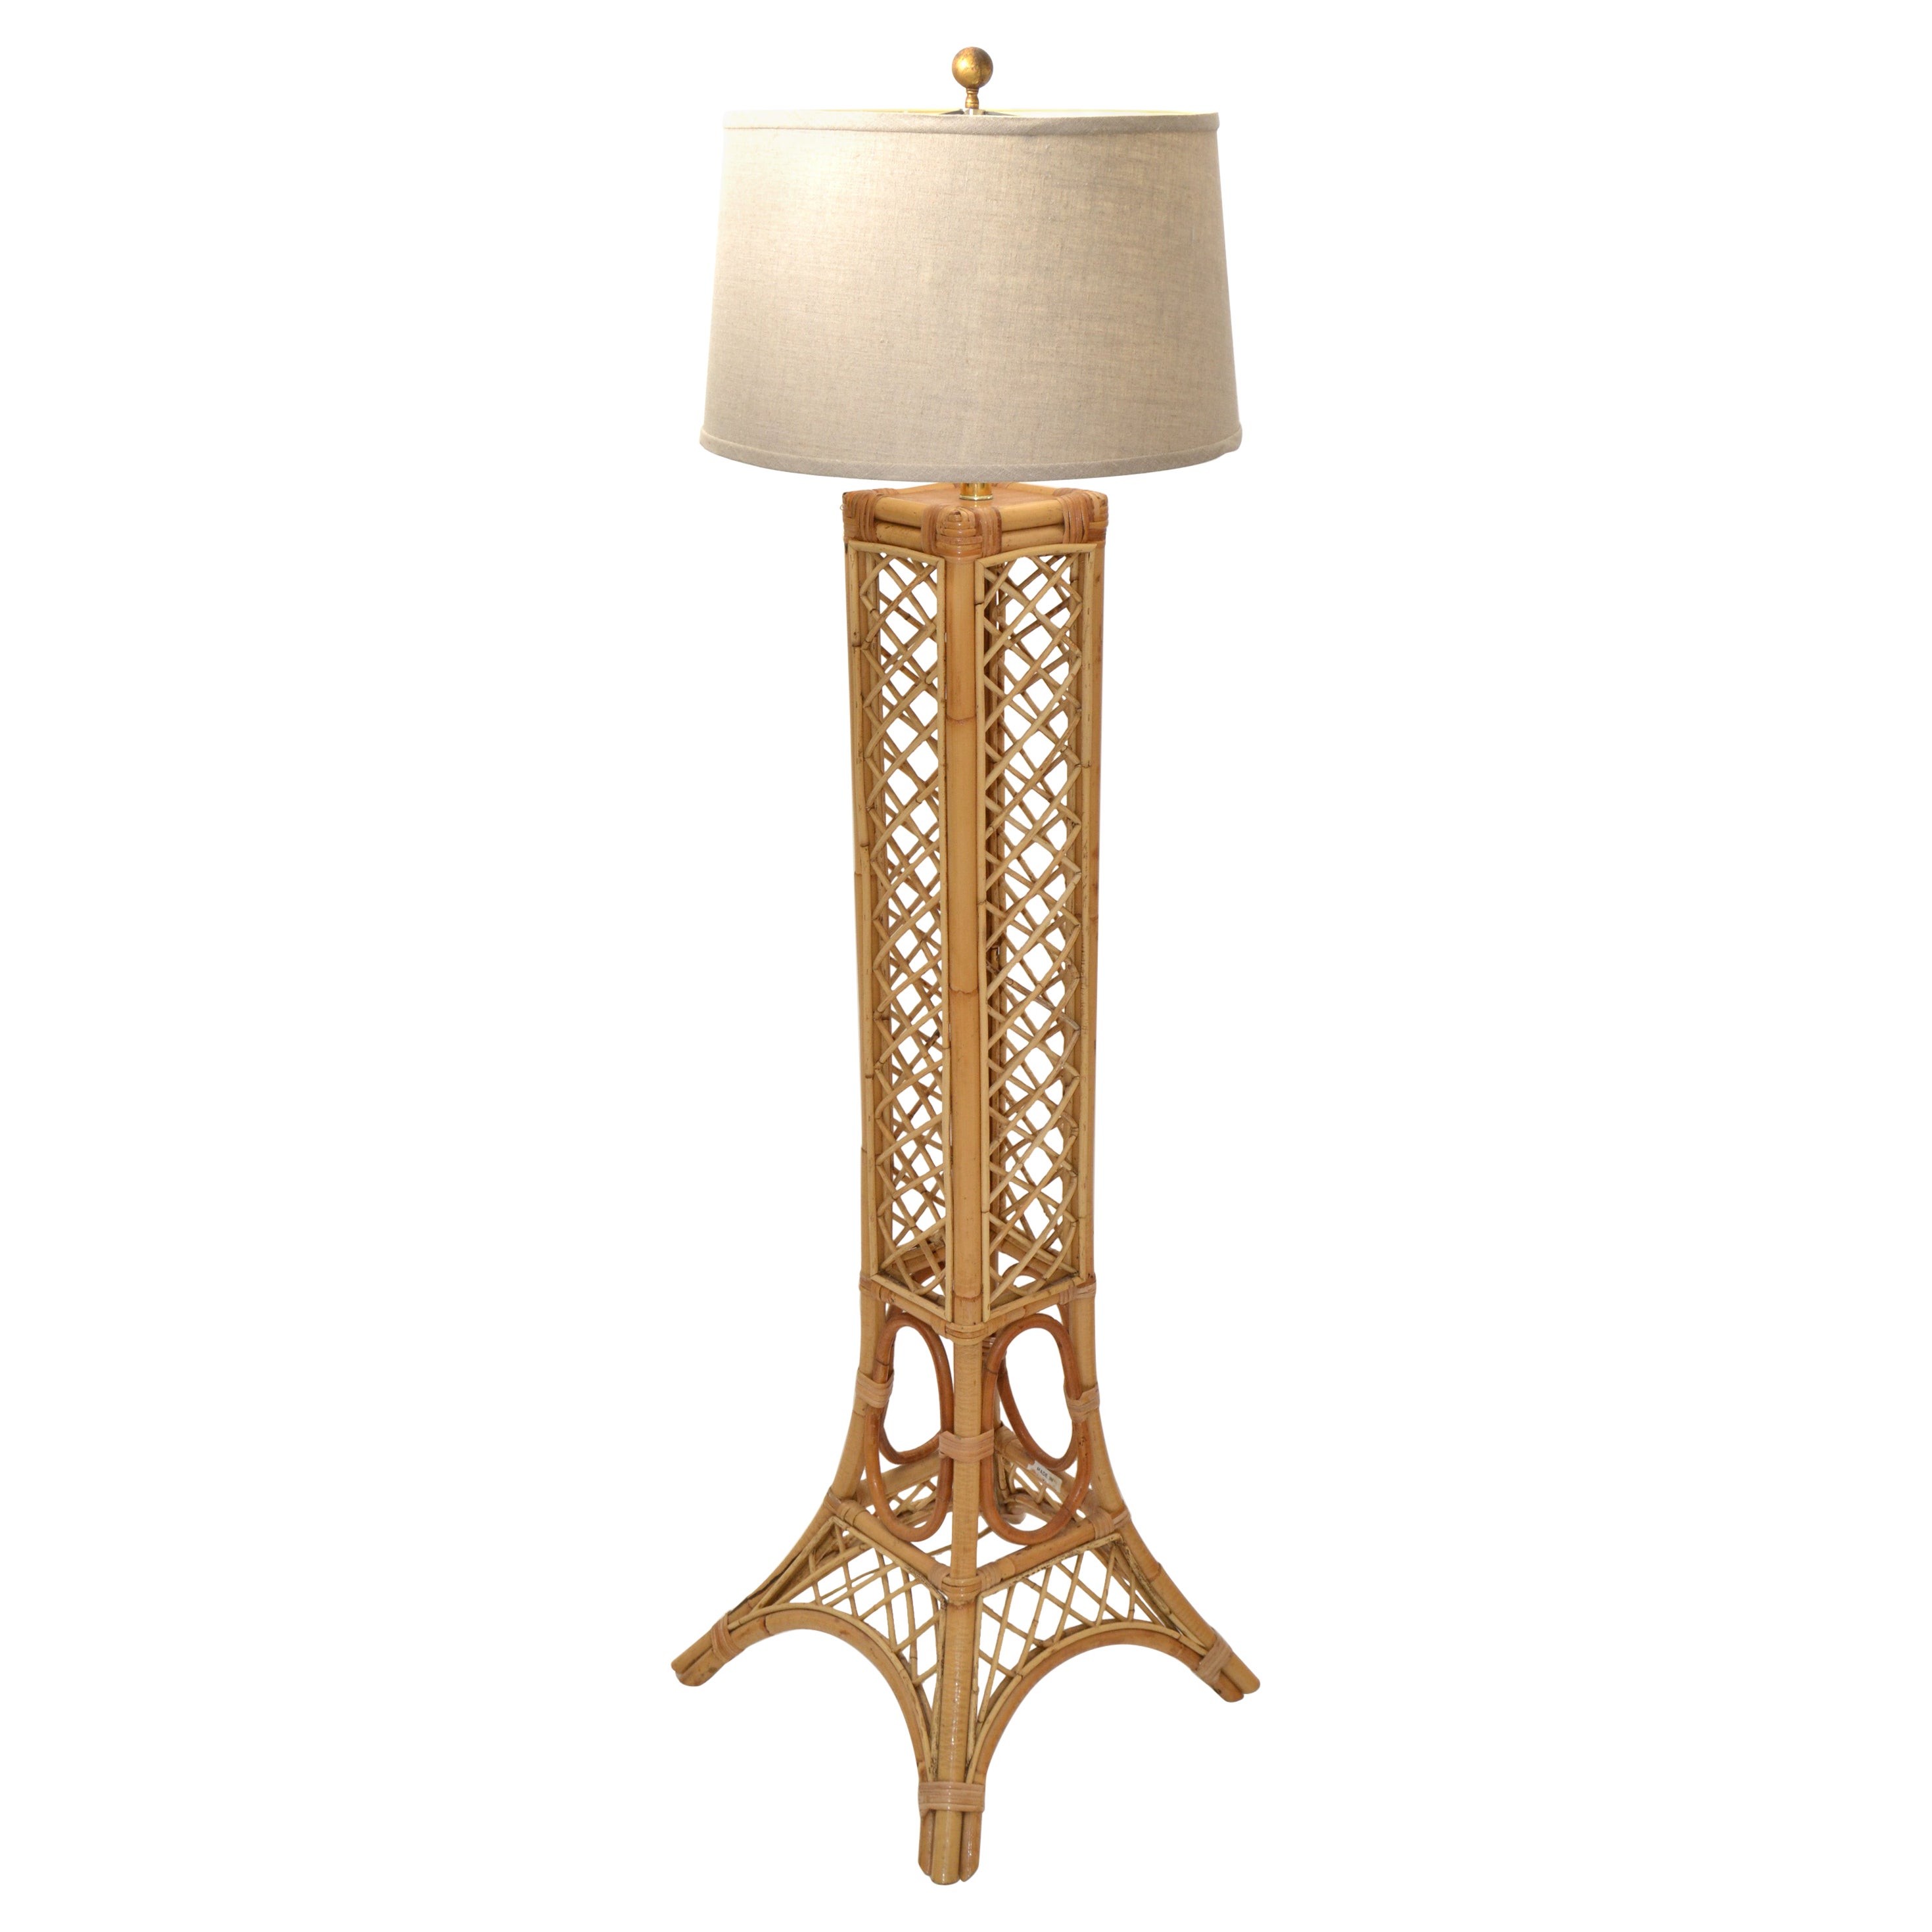 Eiffel Tower Paris Pencil Reed & Bend Bamboo Mid-Century Modern Floor Lamp 1970 For Sale